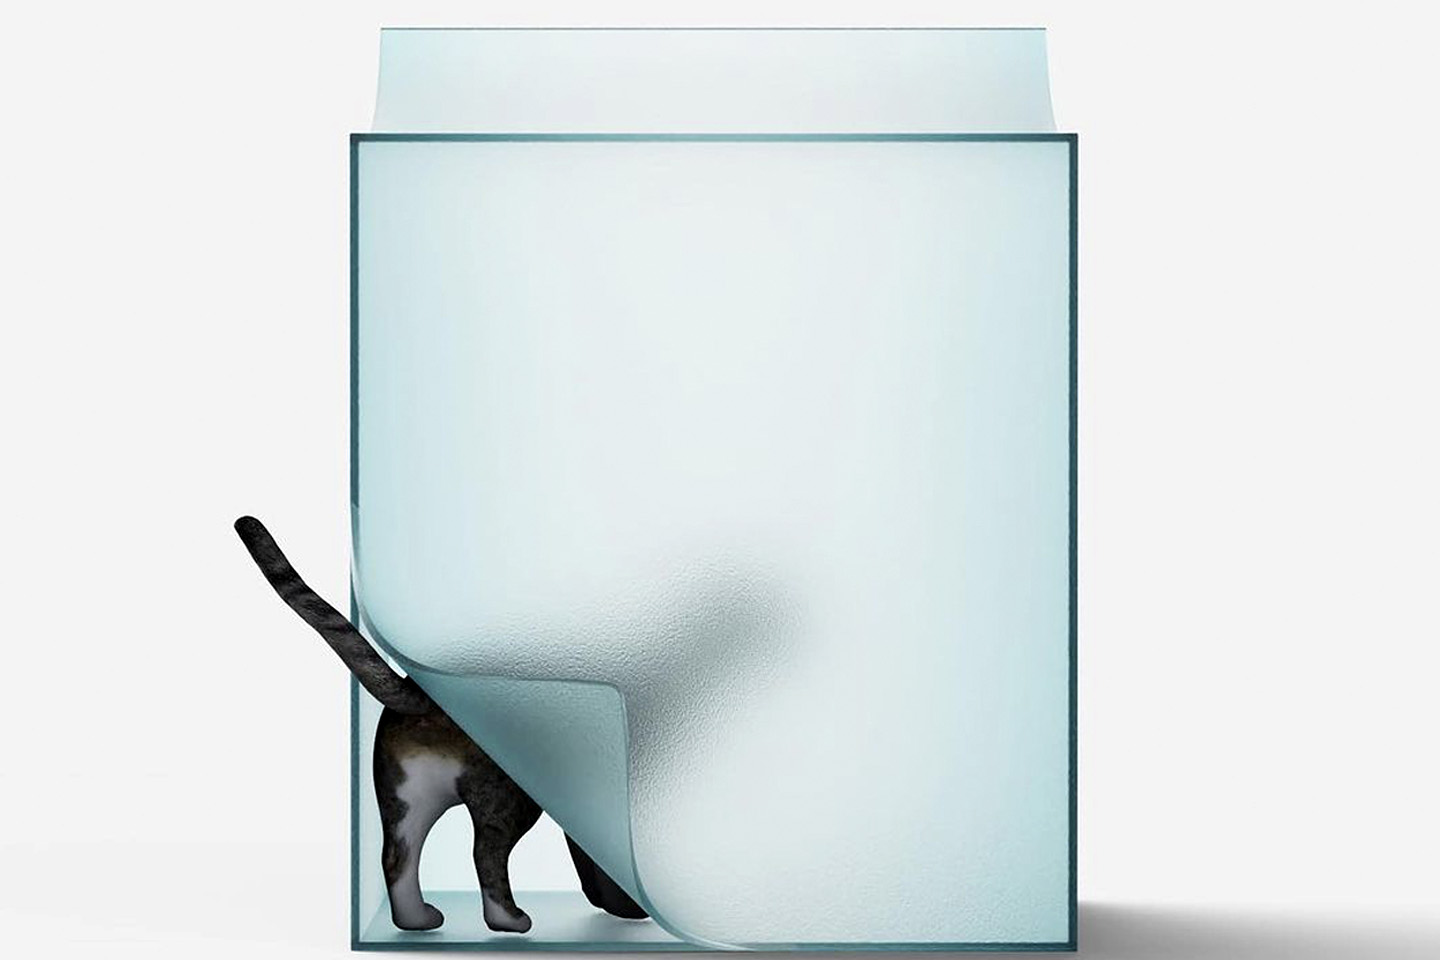 #Translucent Cuboidal Stool Is The Ultimate Lounging/Hiding Spot For Your Moody Cat’s ‘Me Time’